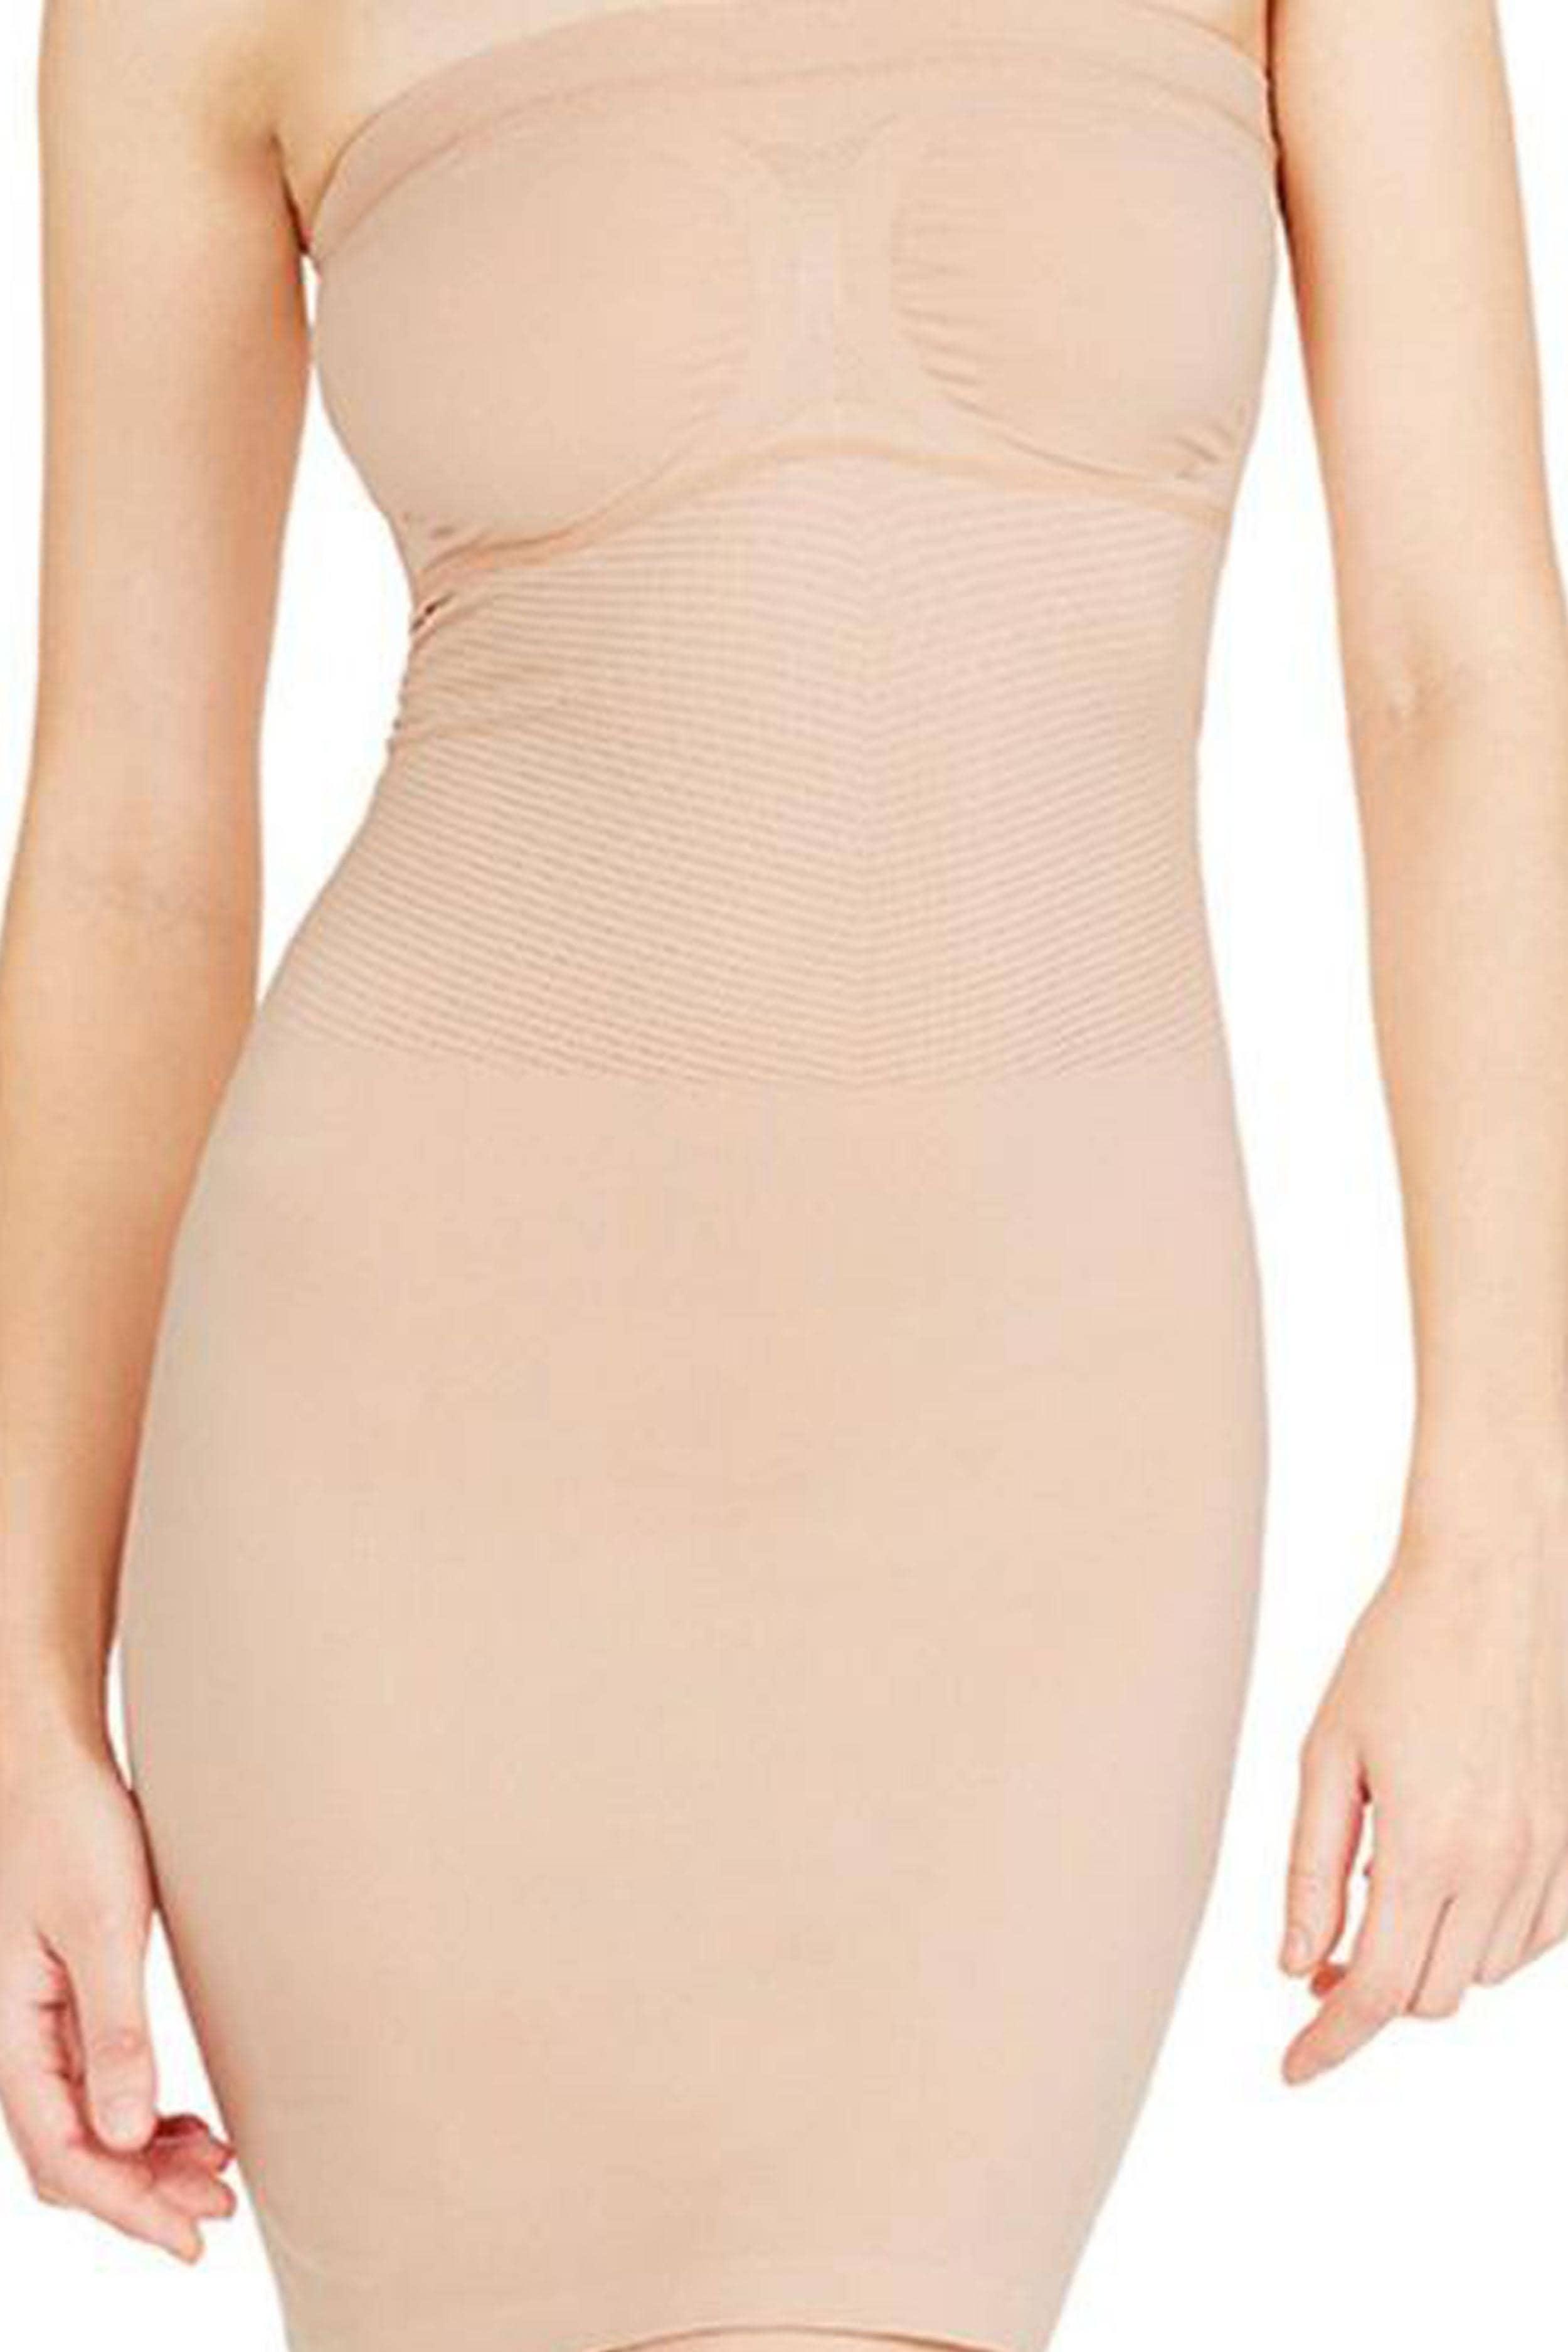 Nearly Nude Strapless Maternity Slip - Ideal Underdress - Rent Now